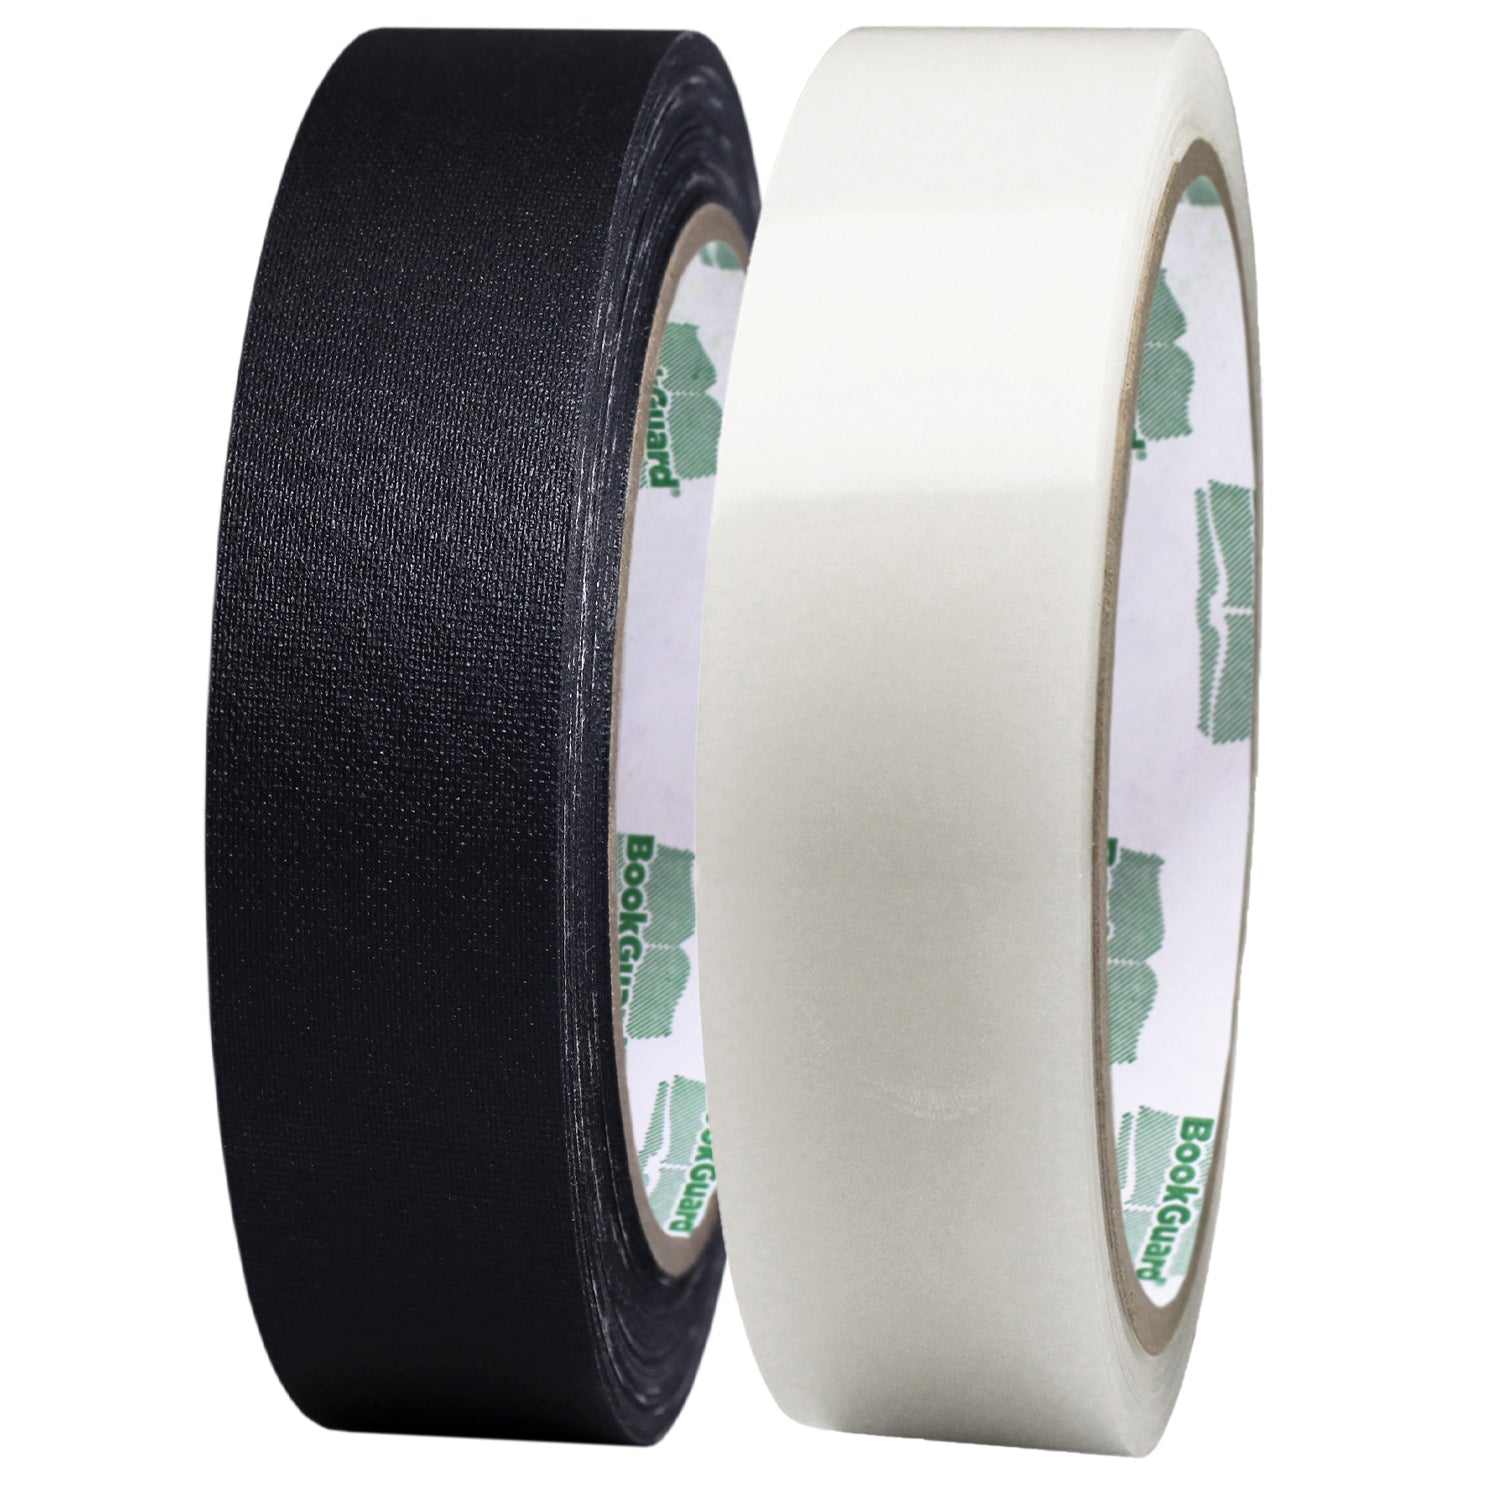 1 BookGuard Tape Kit, Black Cloth Tape and Clear Poly Tape, 2 Rolls, 45'/Roll